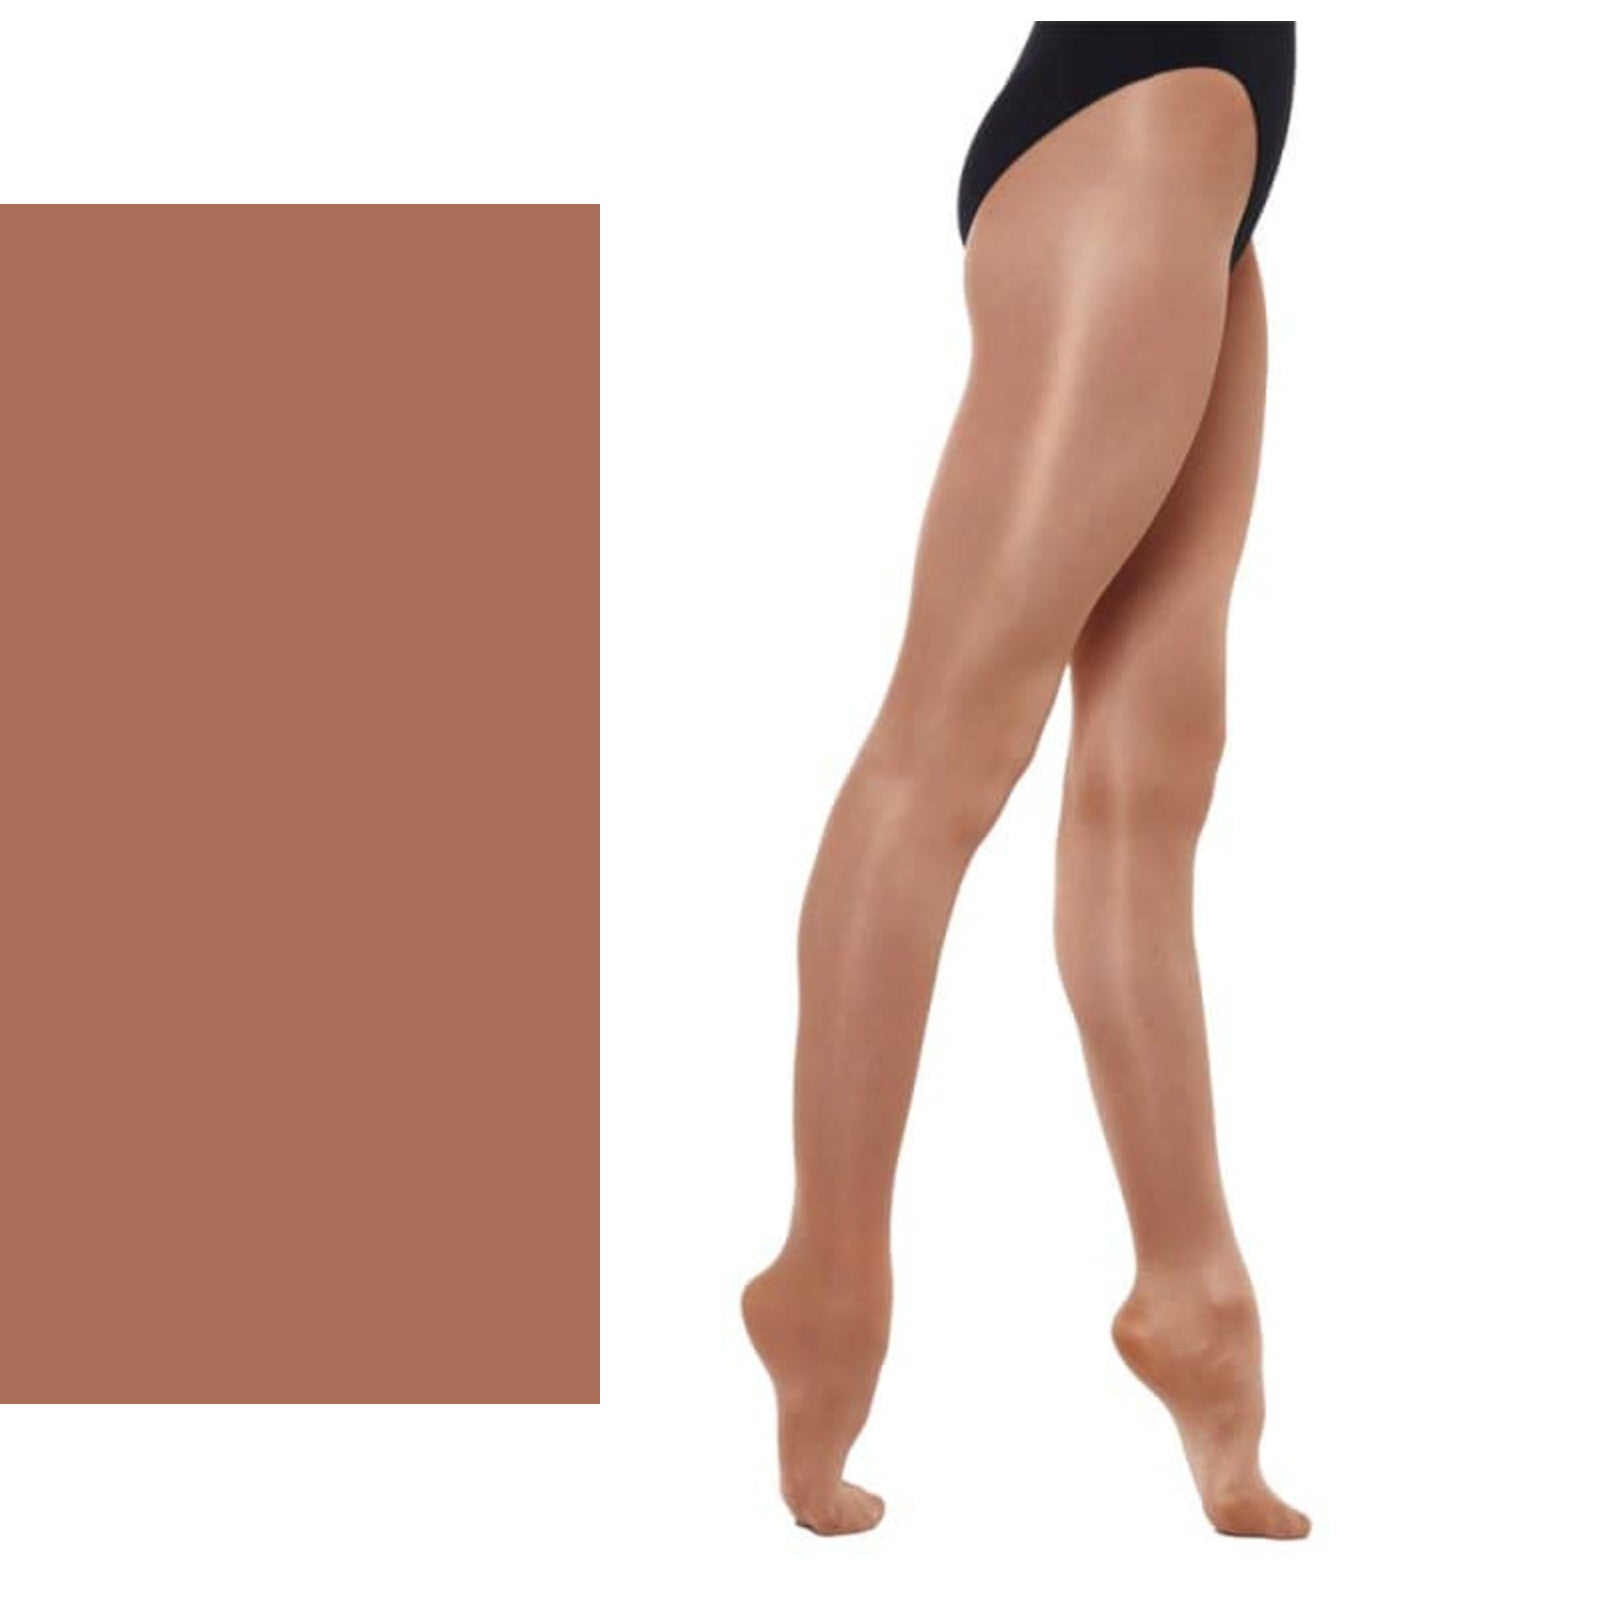 Adult Footed Shimmery Dance Tights